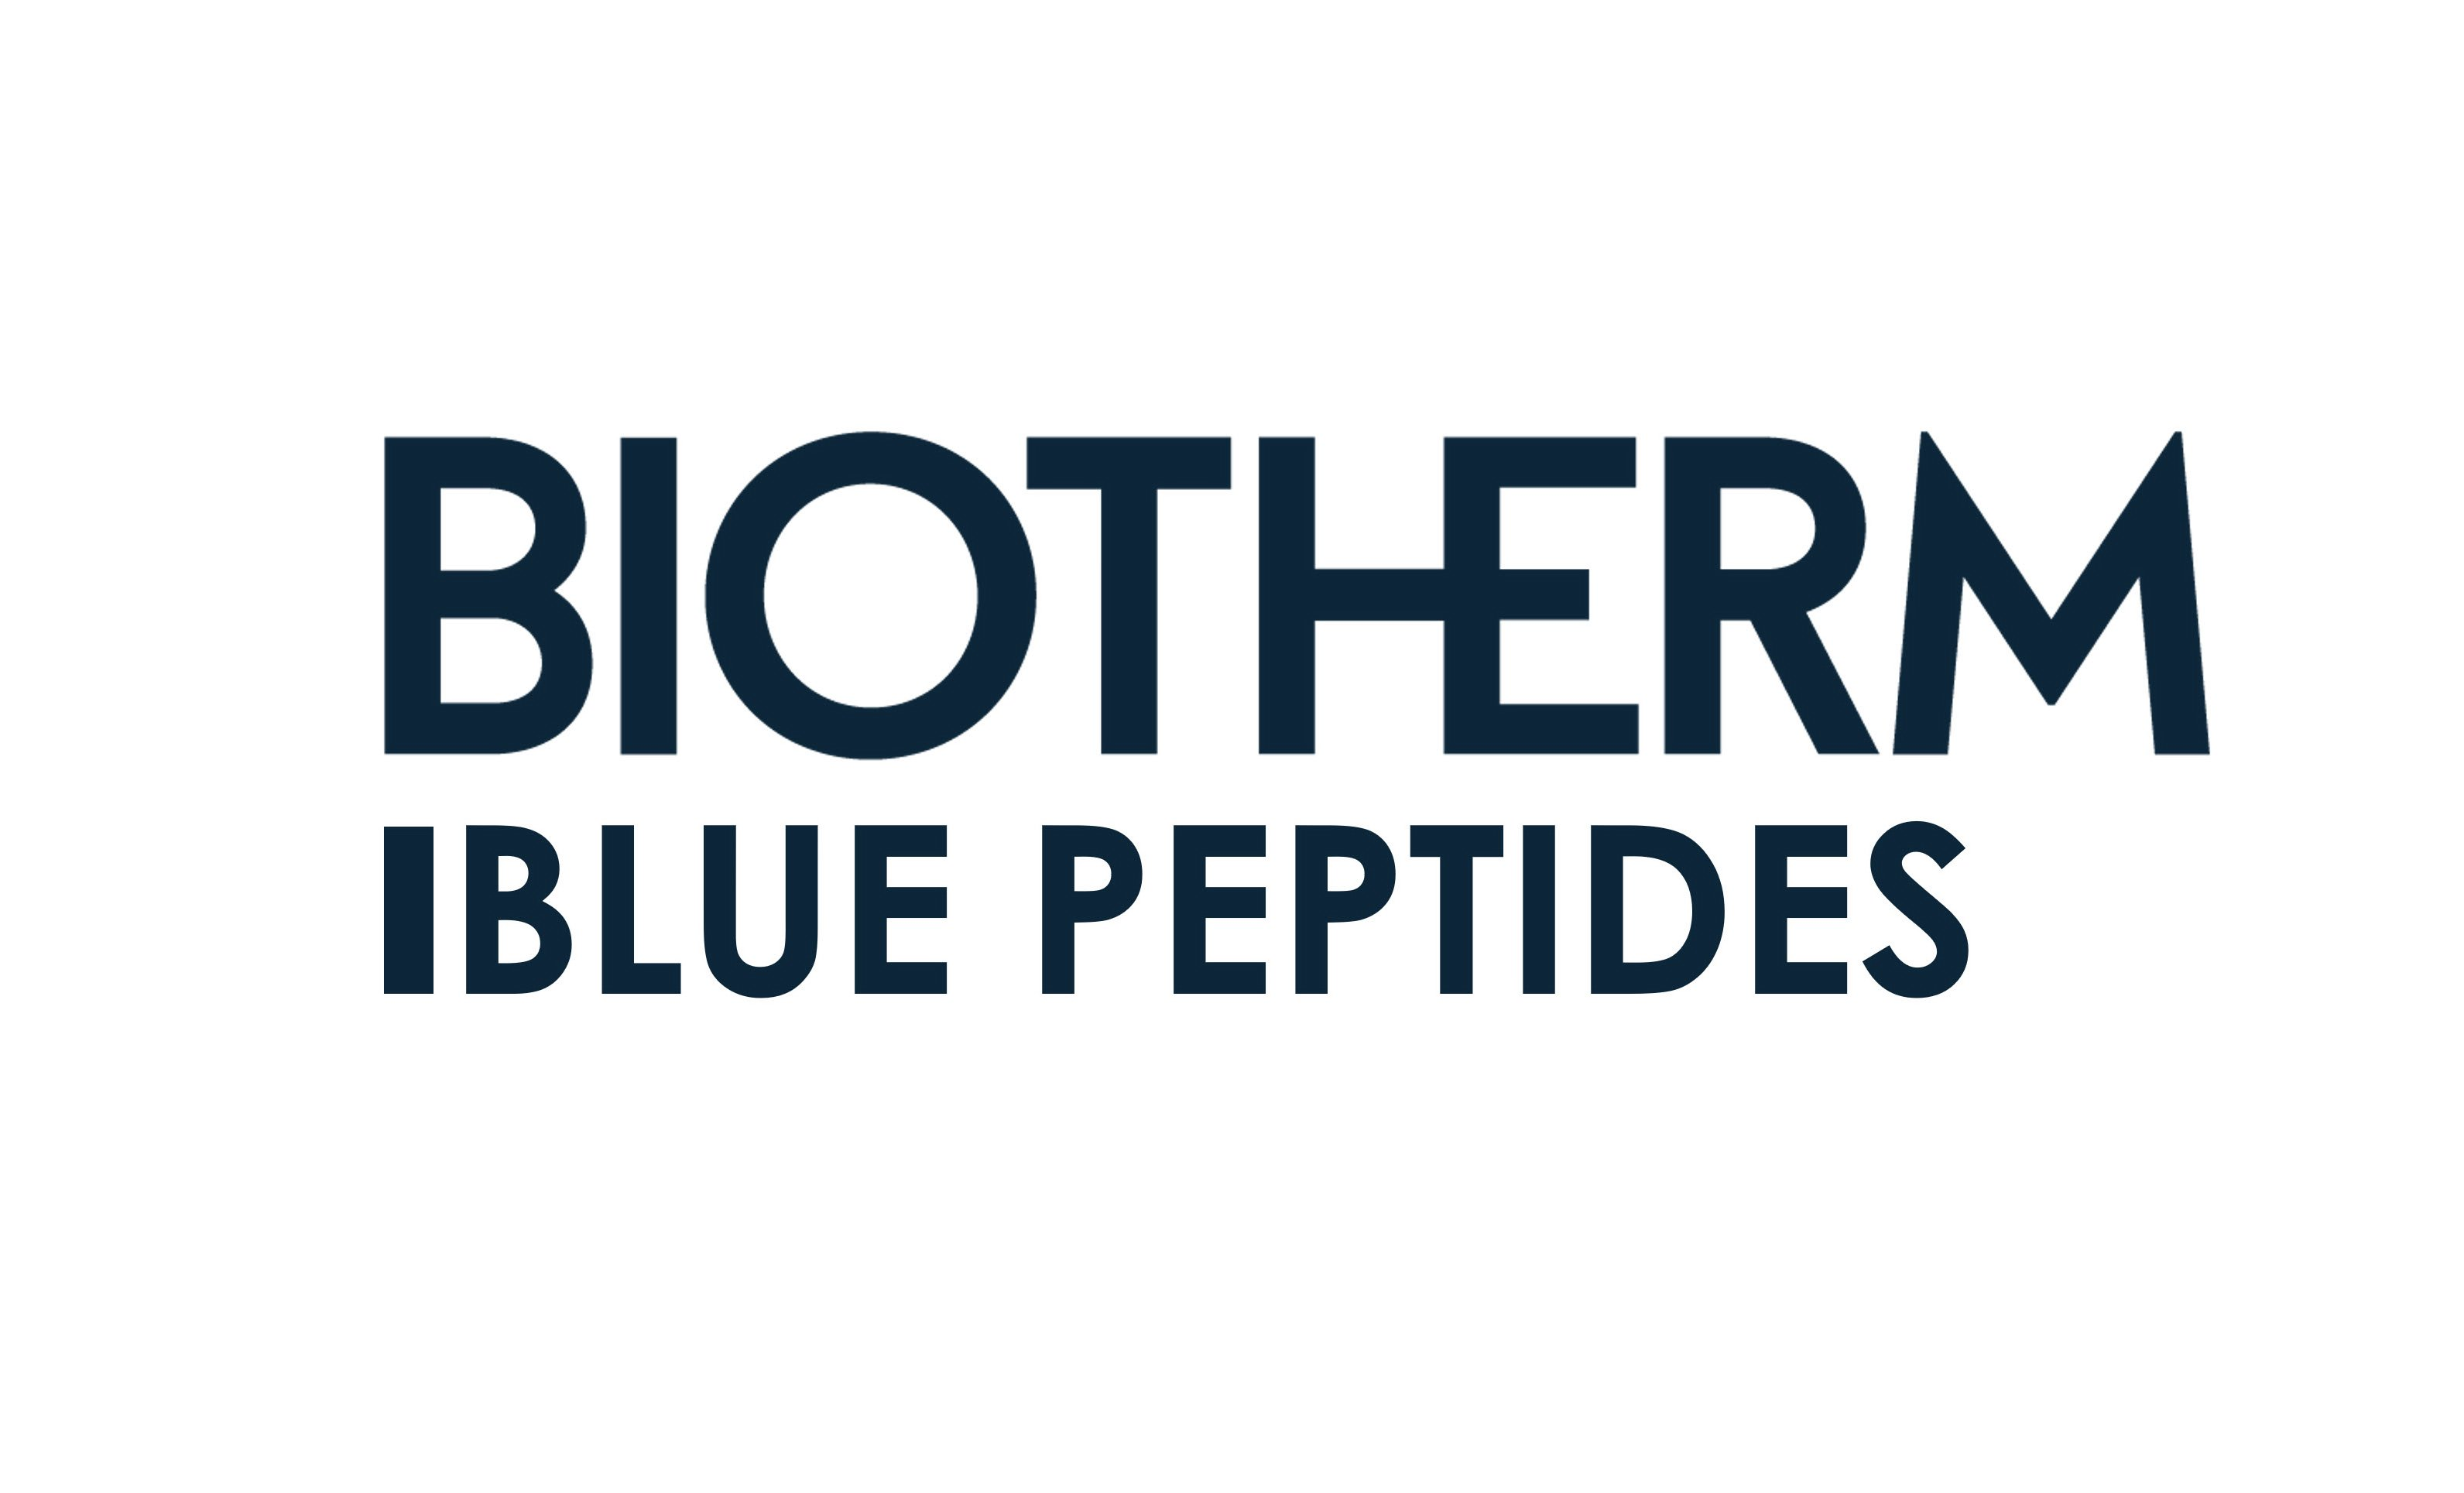  BIOTHERM BLUE PEPTIDES